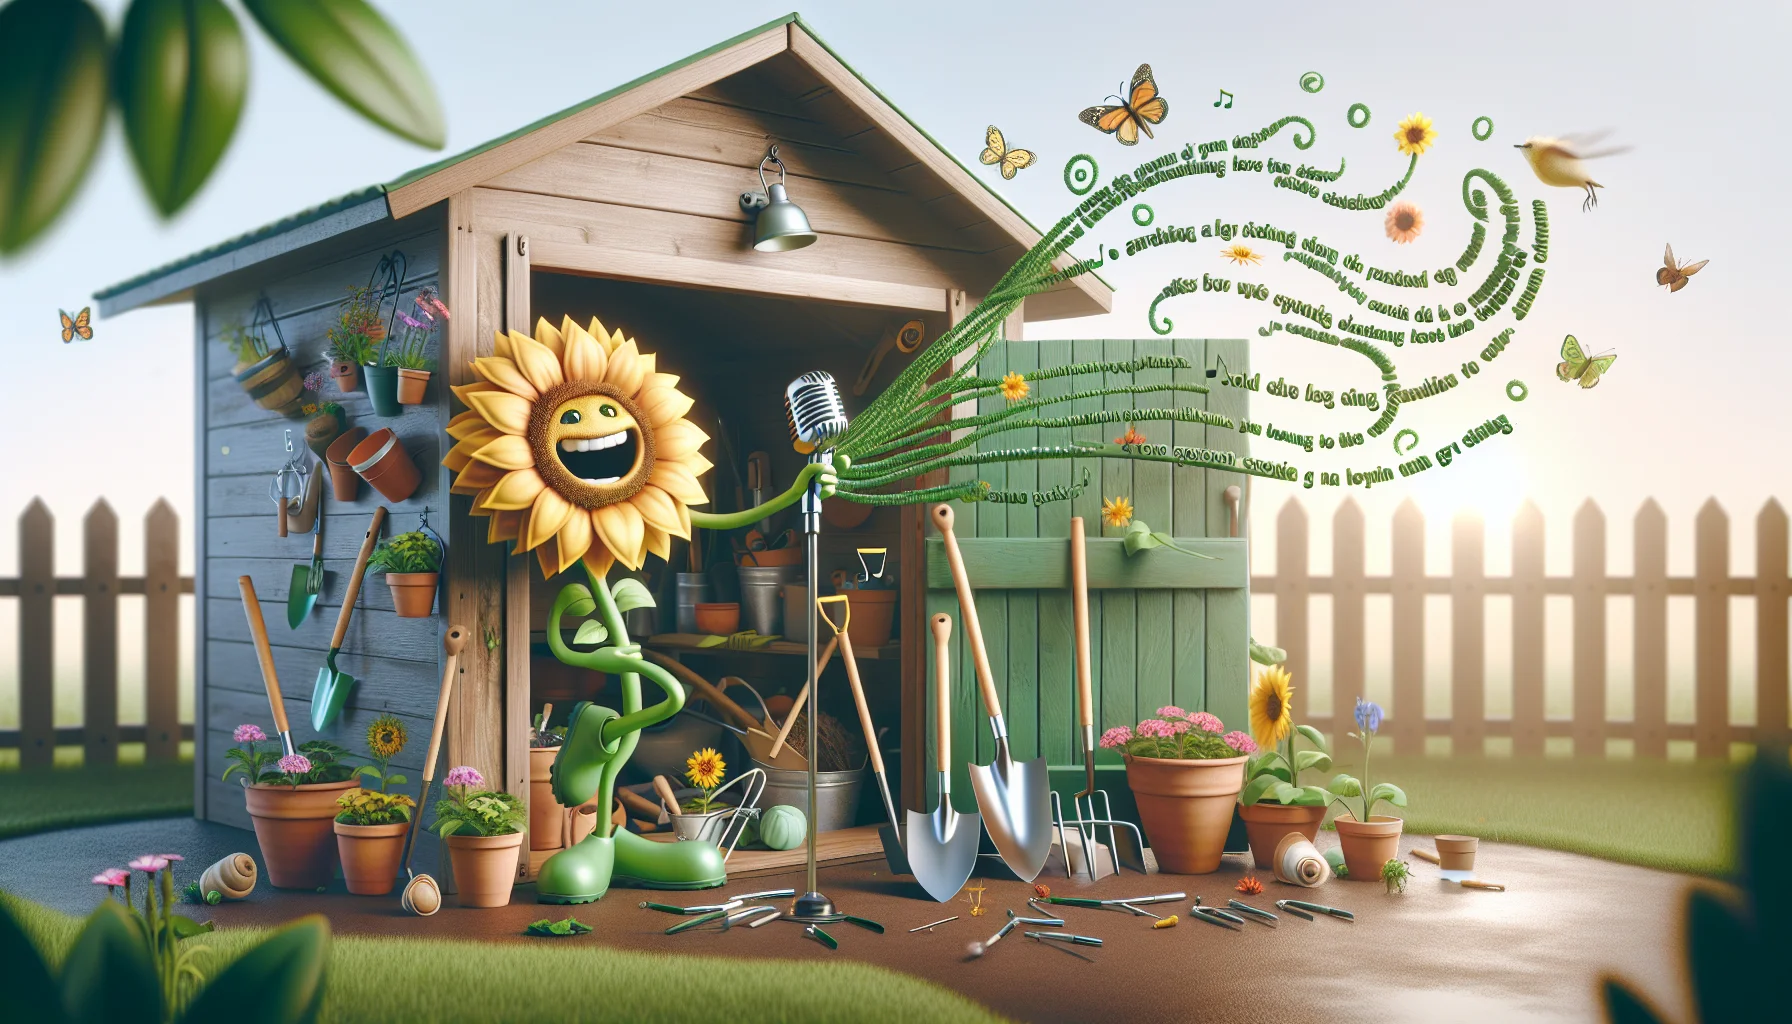 Imagine a lively and amusing gardening scenario. A wooden rustic garden shed is in soft morning sunlight, with its doors wide open, revealing a chaos of gardening tools inside. Leaning against the shed, a cheerful sunflower holds a microphone, singing lyrics about gardening that are displayed in whimsical swirls of green vine-like text around it. A variety of plants and flowers sway playfully as if dancing to the rhythm. There are amused bees, butterflies, and birds gathering around, intrigued by this entertaining spectacle. The scene emphasizing the joy and fun that can be found in gardening.